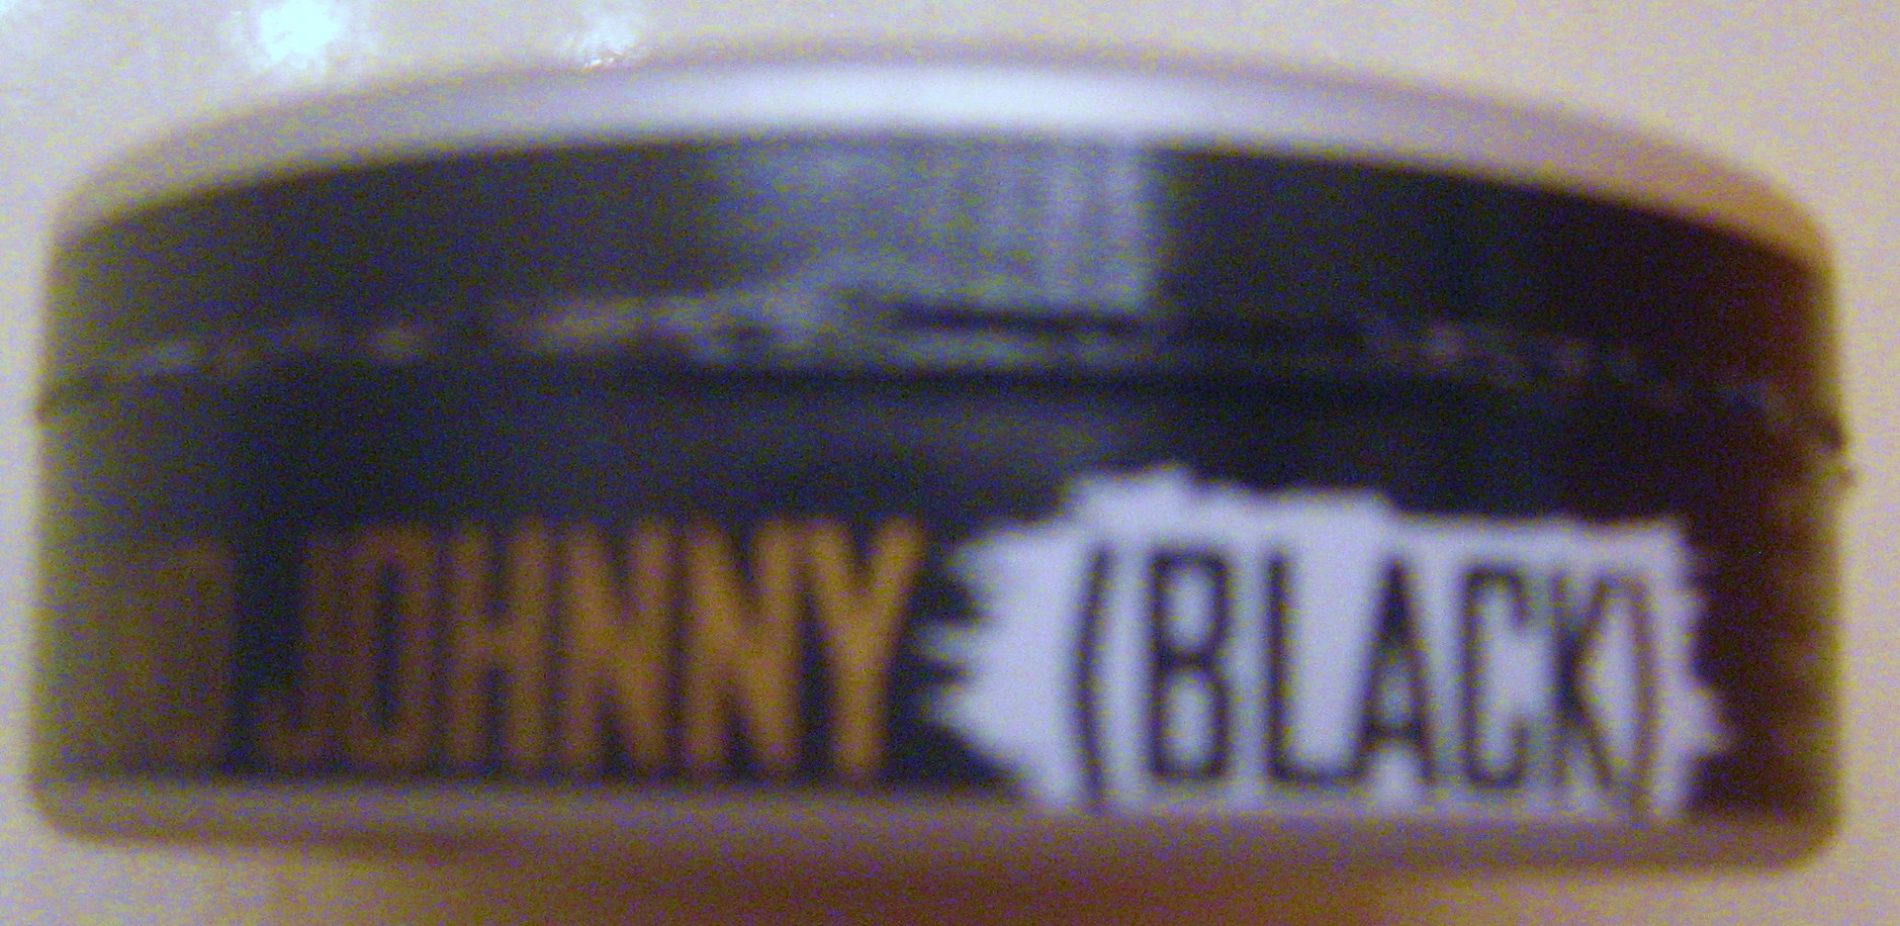 Nick and Johnny BLACK Portion Snus – First Look!